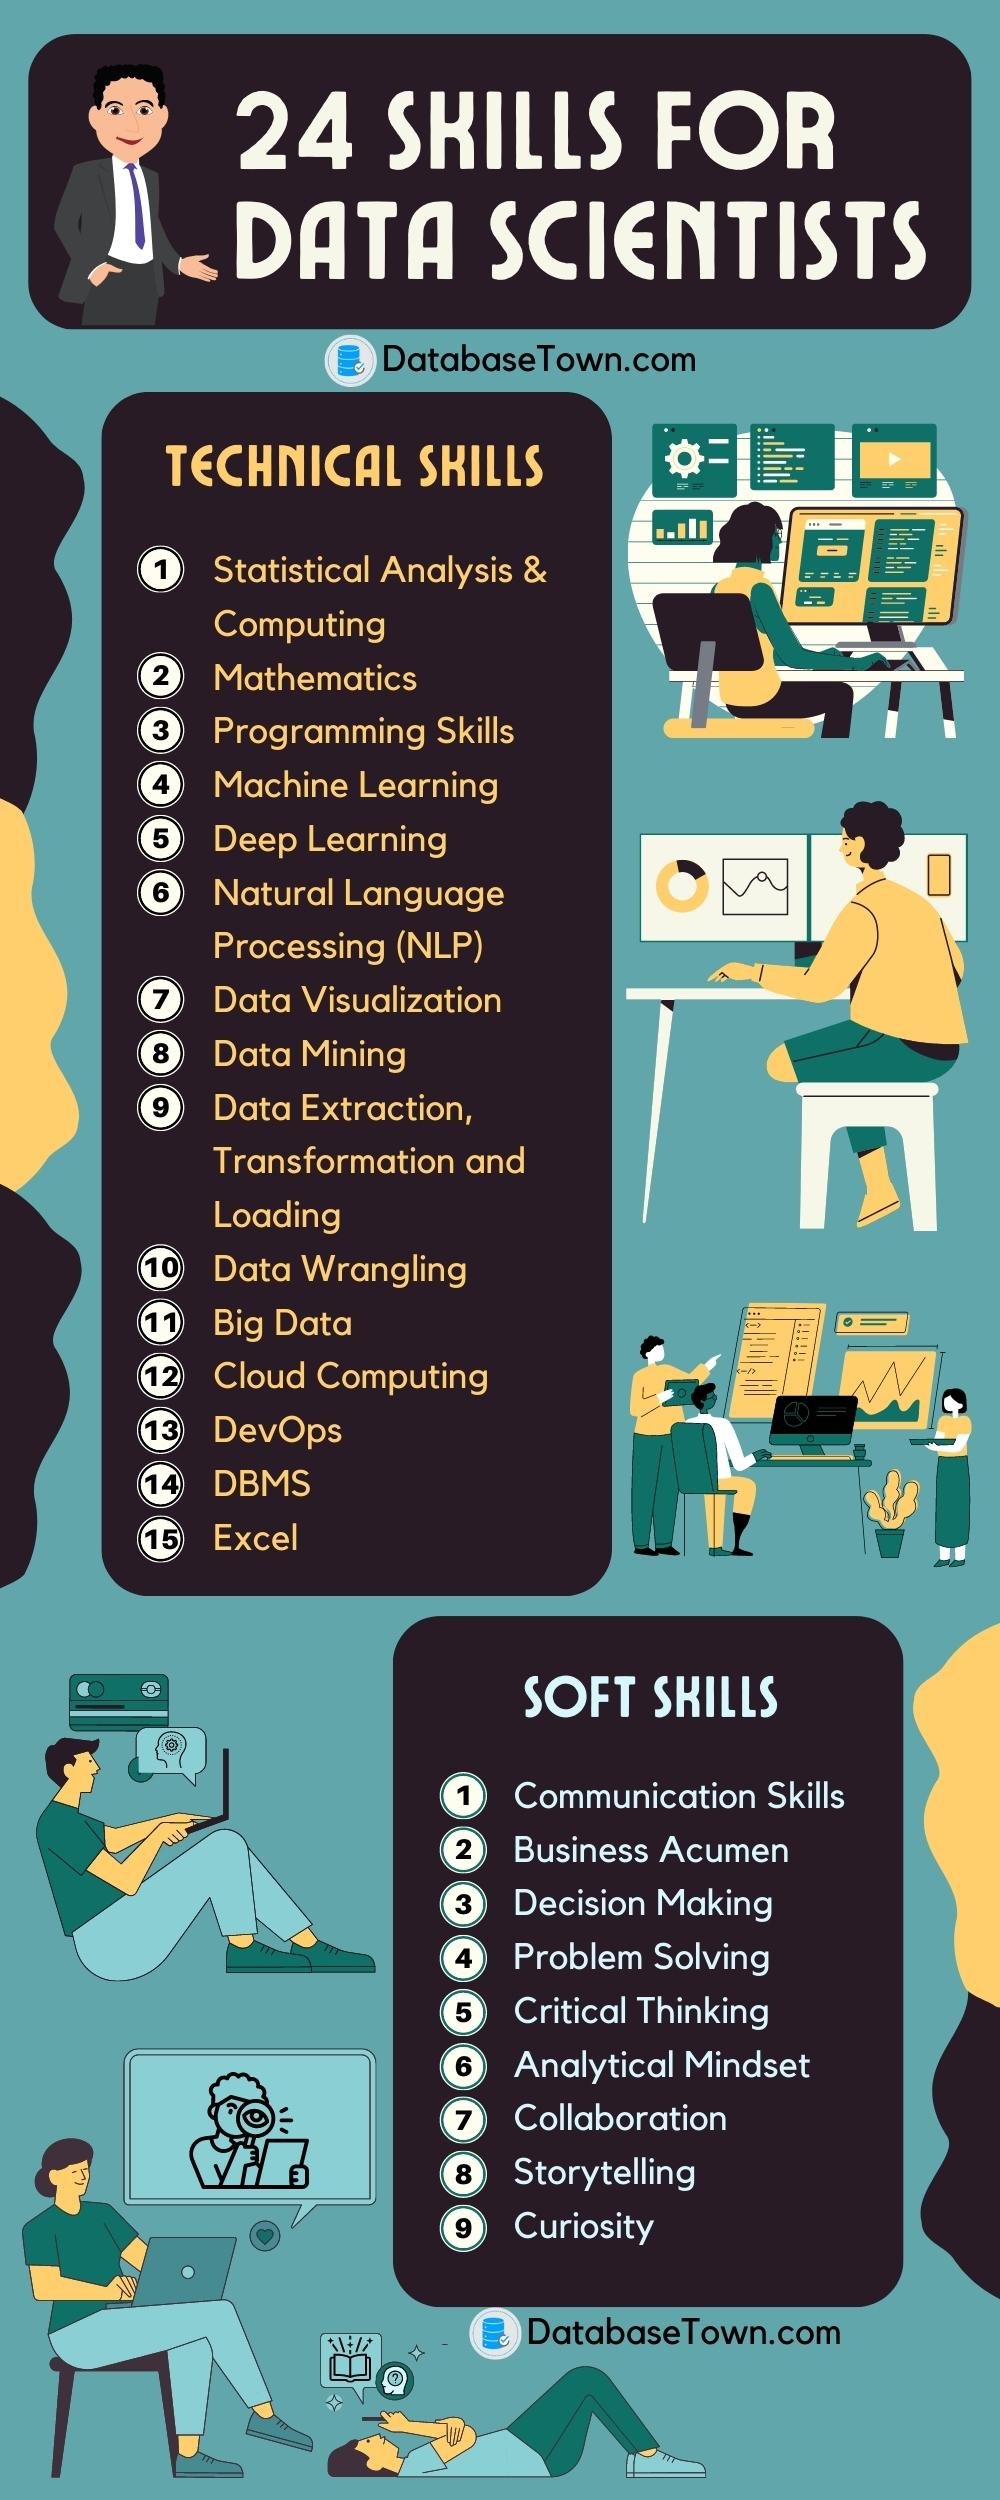 What are the Skills Required for Data Scientists